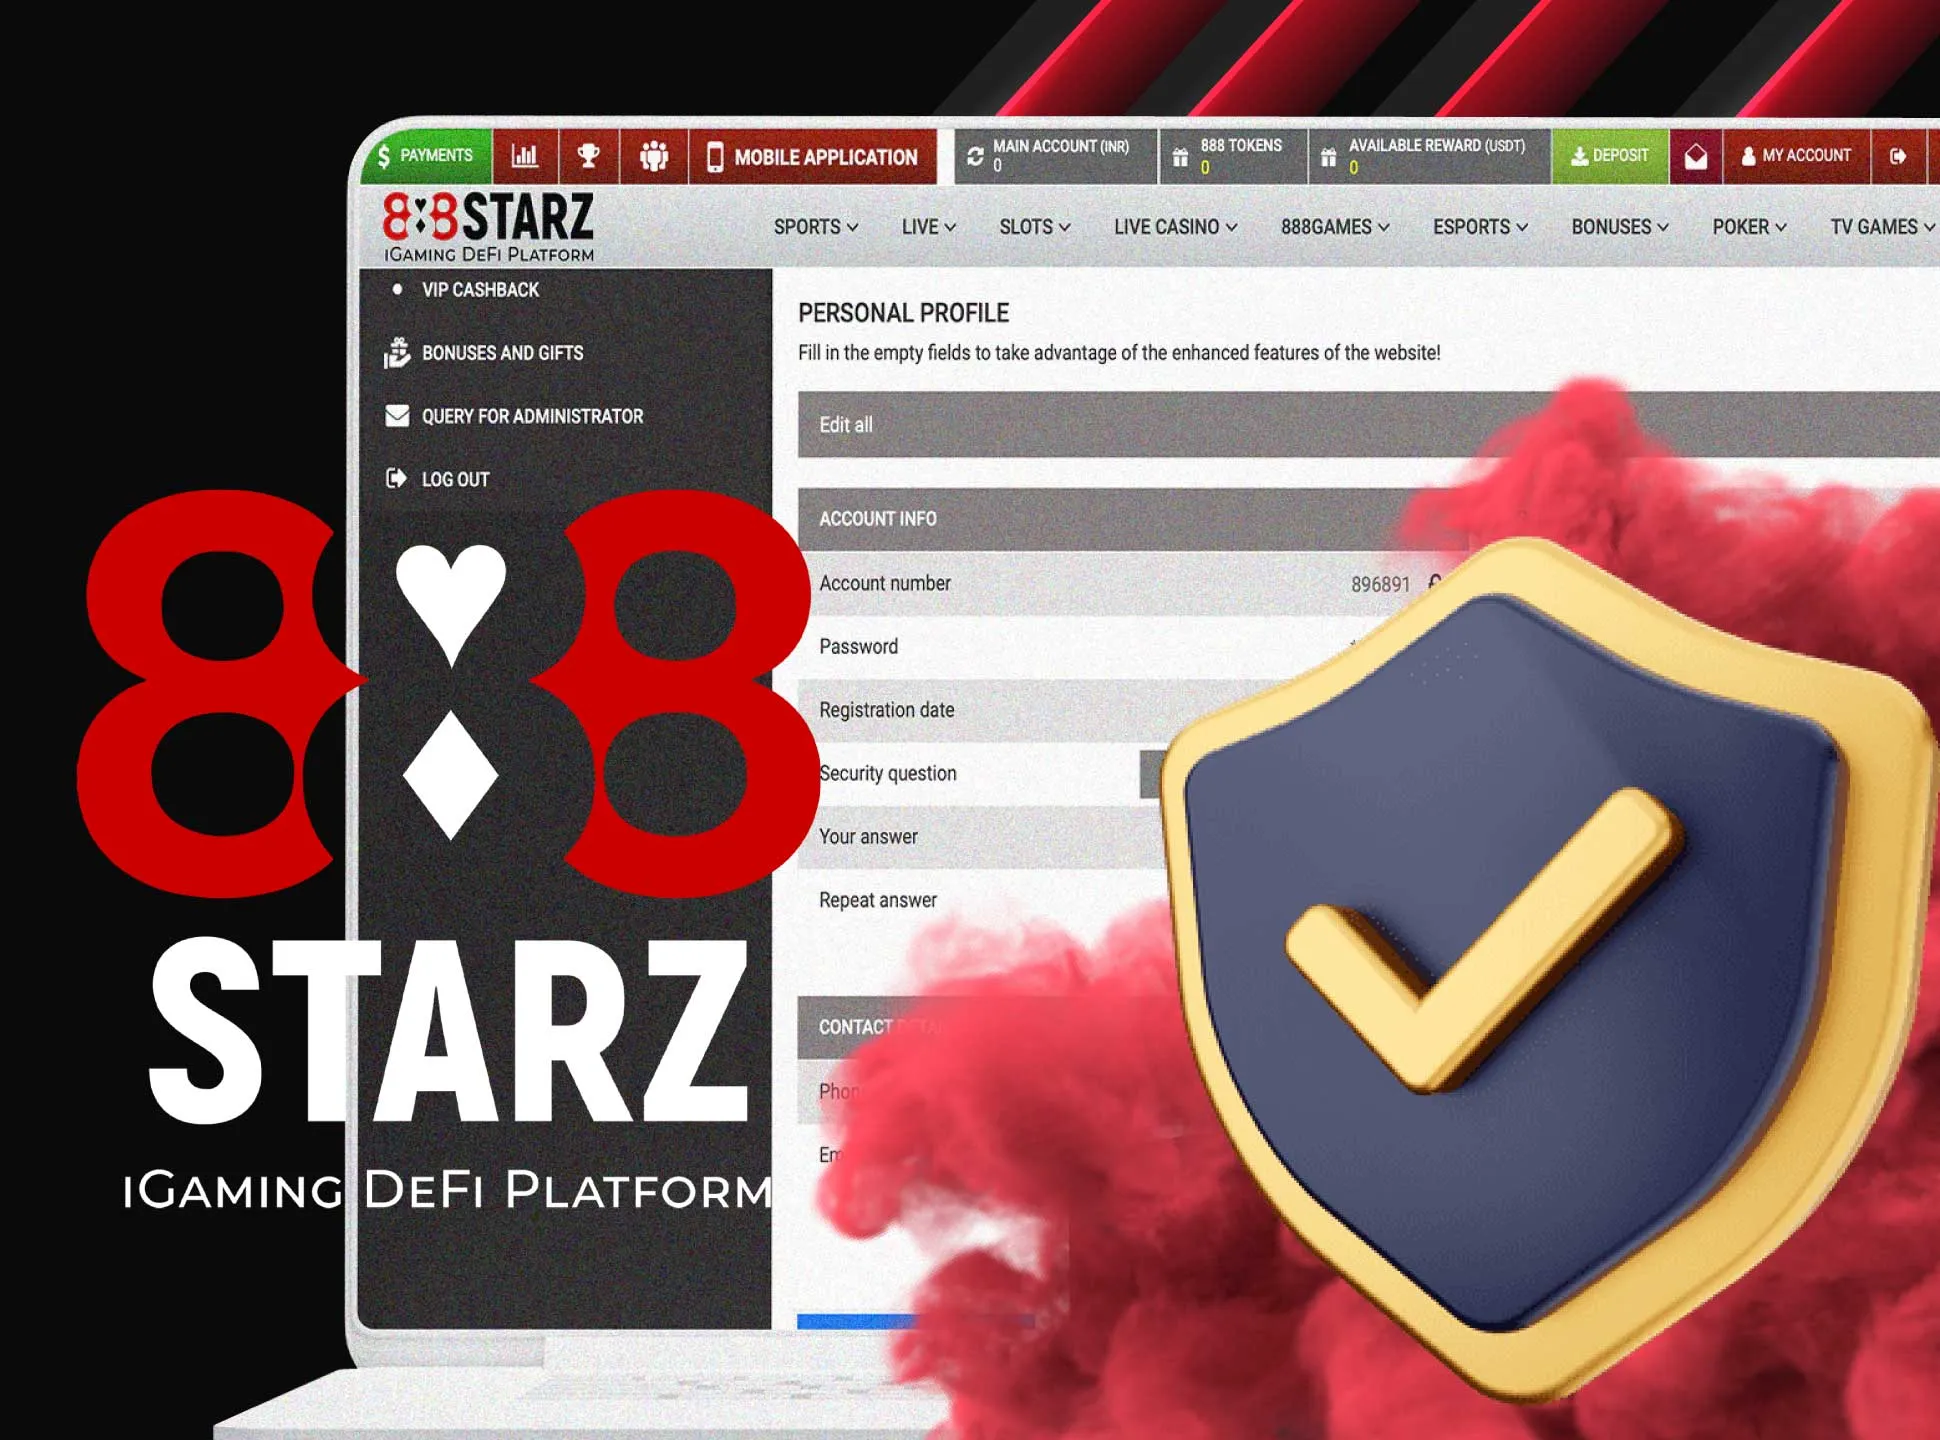 Every 888starz user should verify his account.